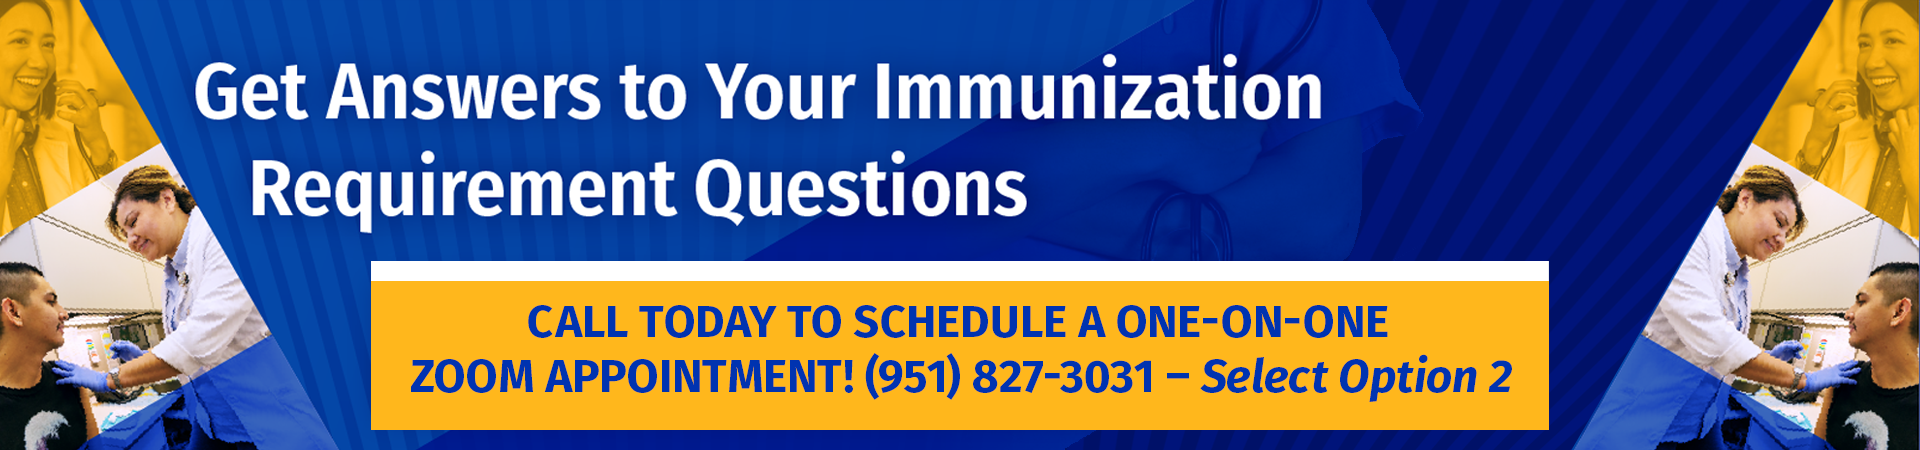 Immunizations Zoom Appointments